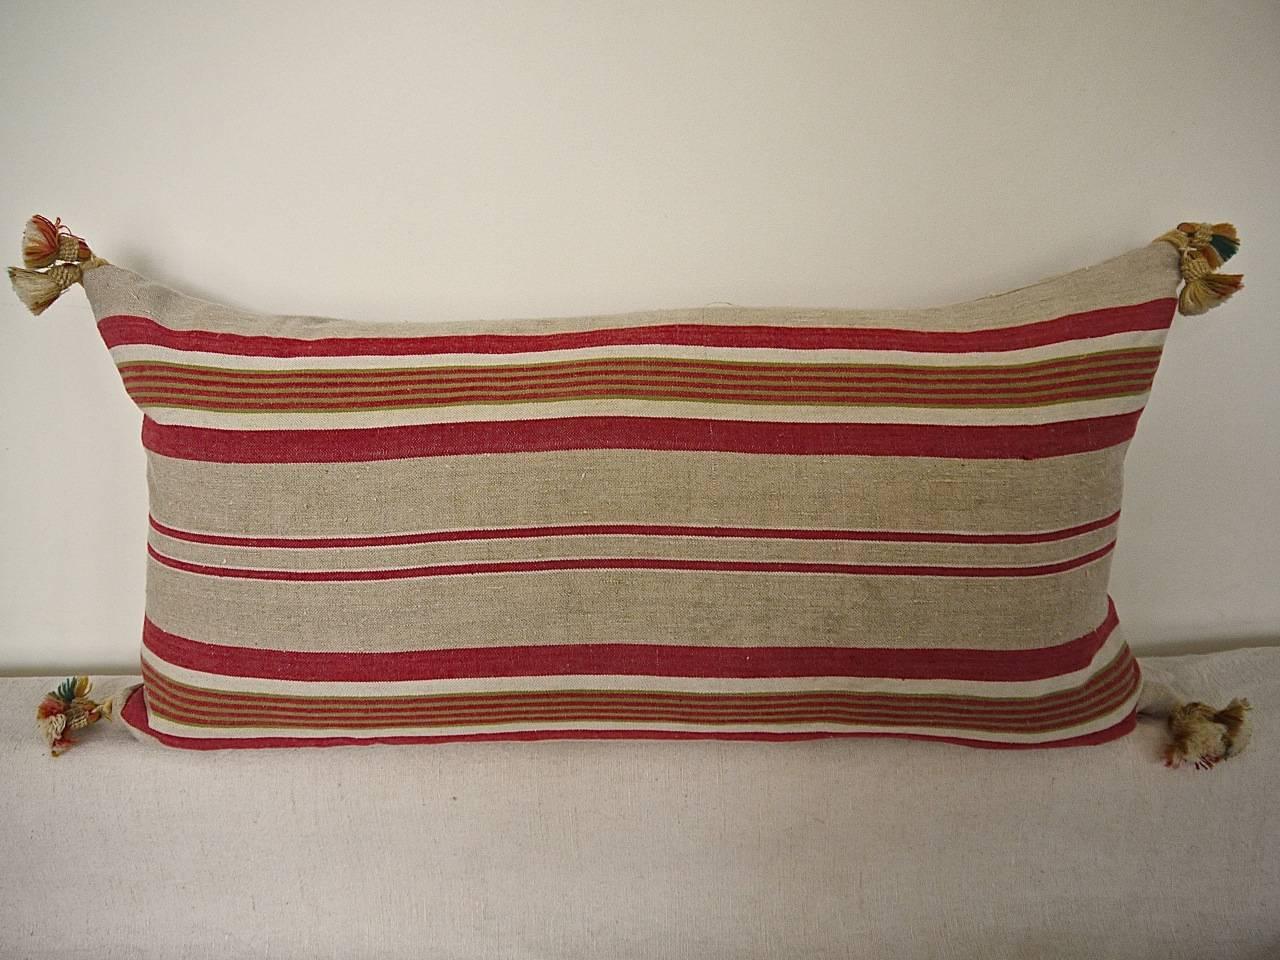 French linen ticking cushion in stripes of red, beige and thin khaki green. With 19th century, French wool tassels on each corner. Slip-stitched closed with a duck feather insert.